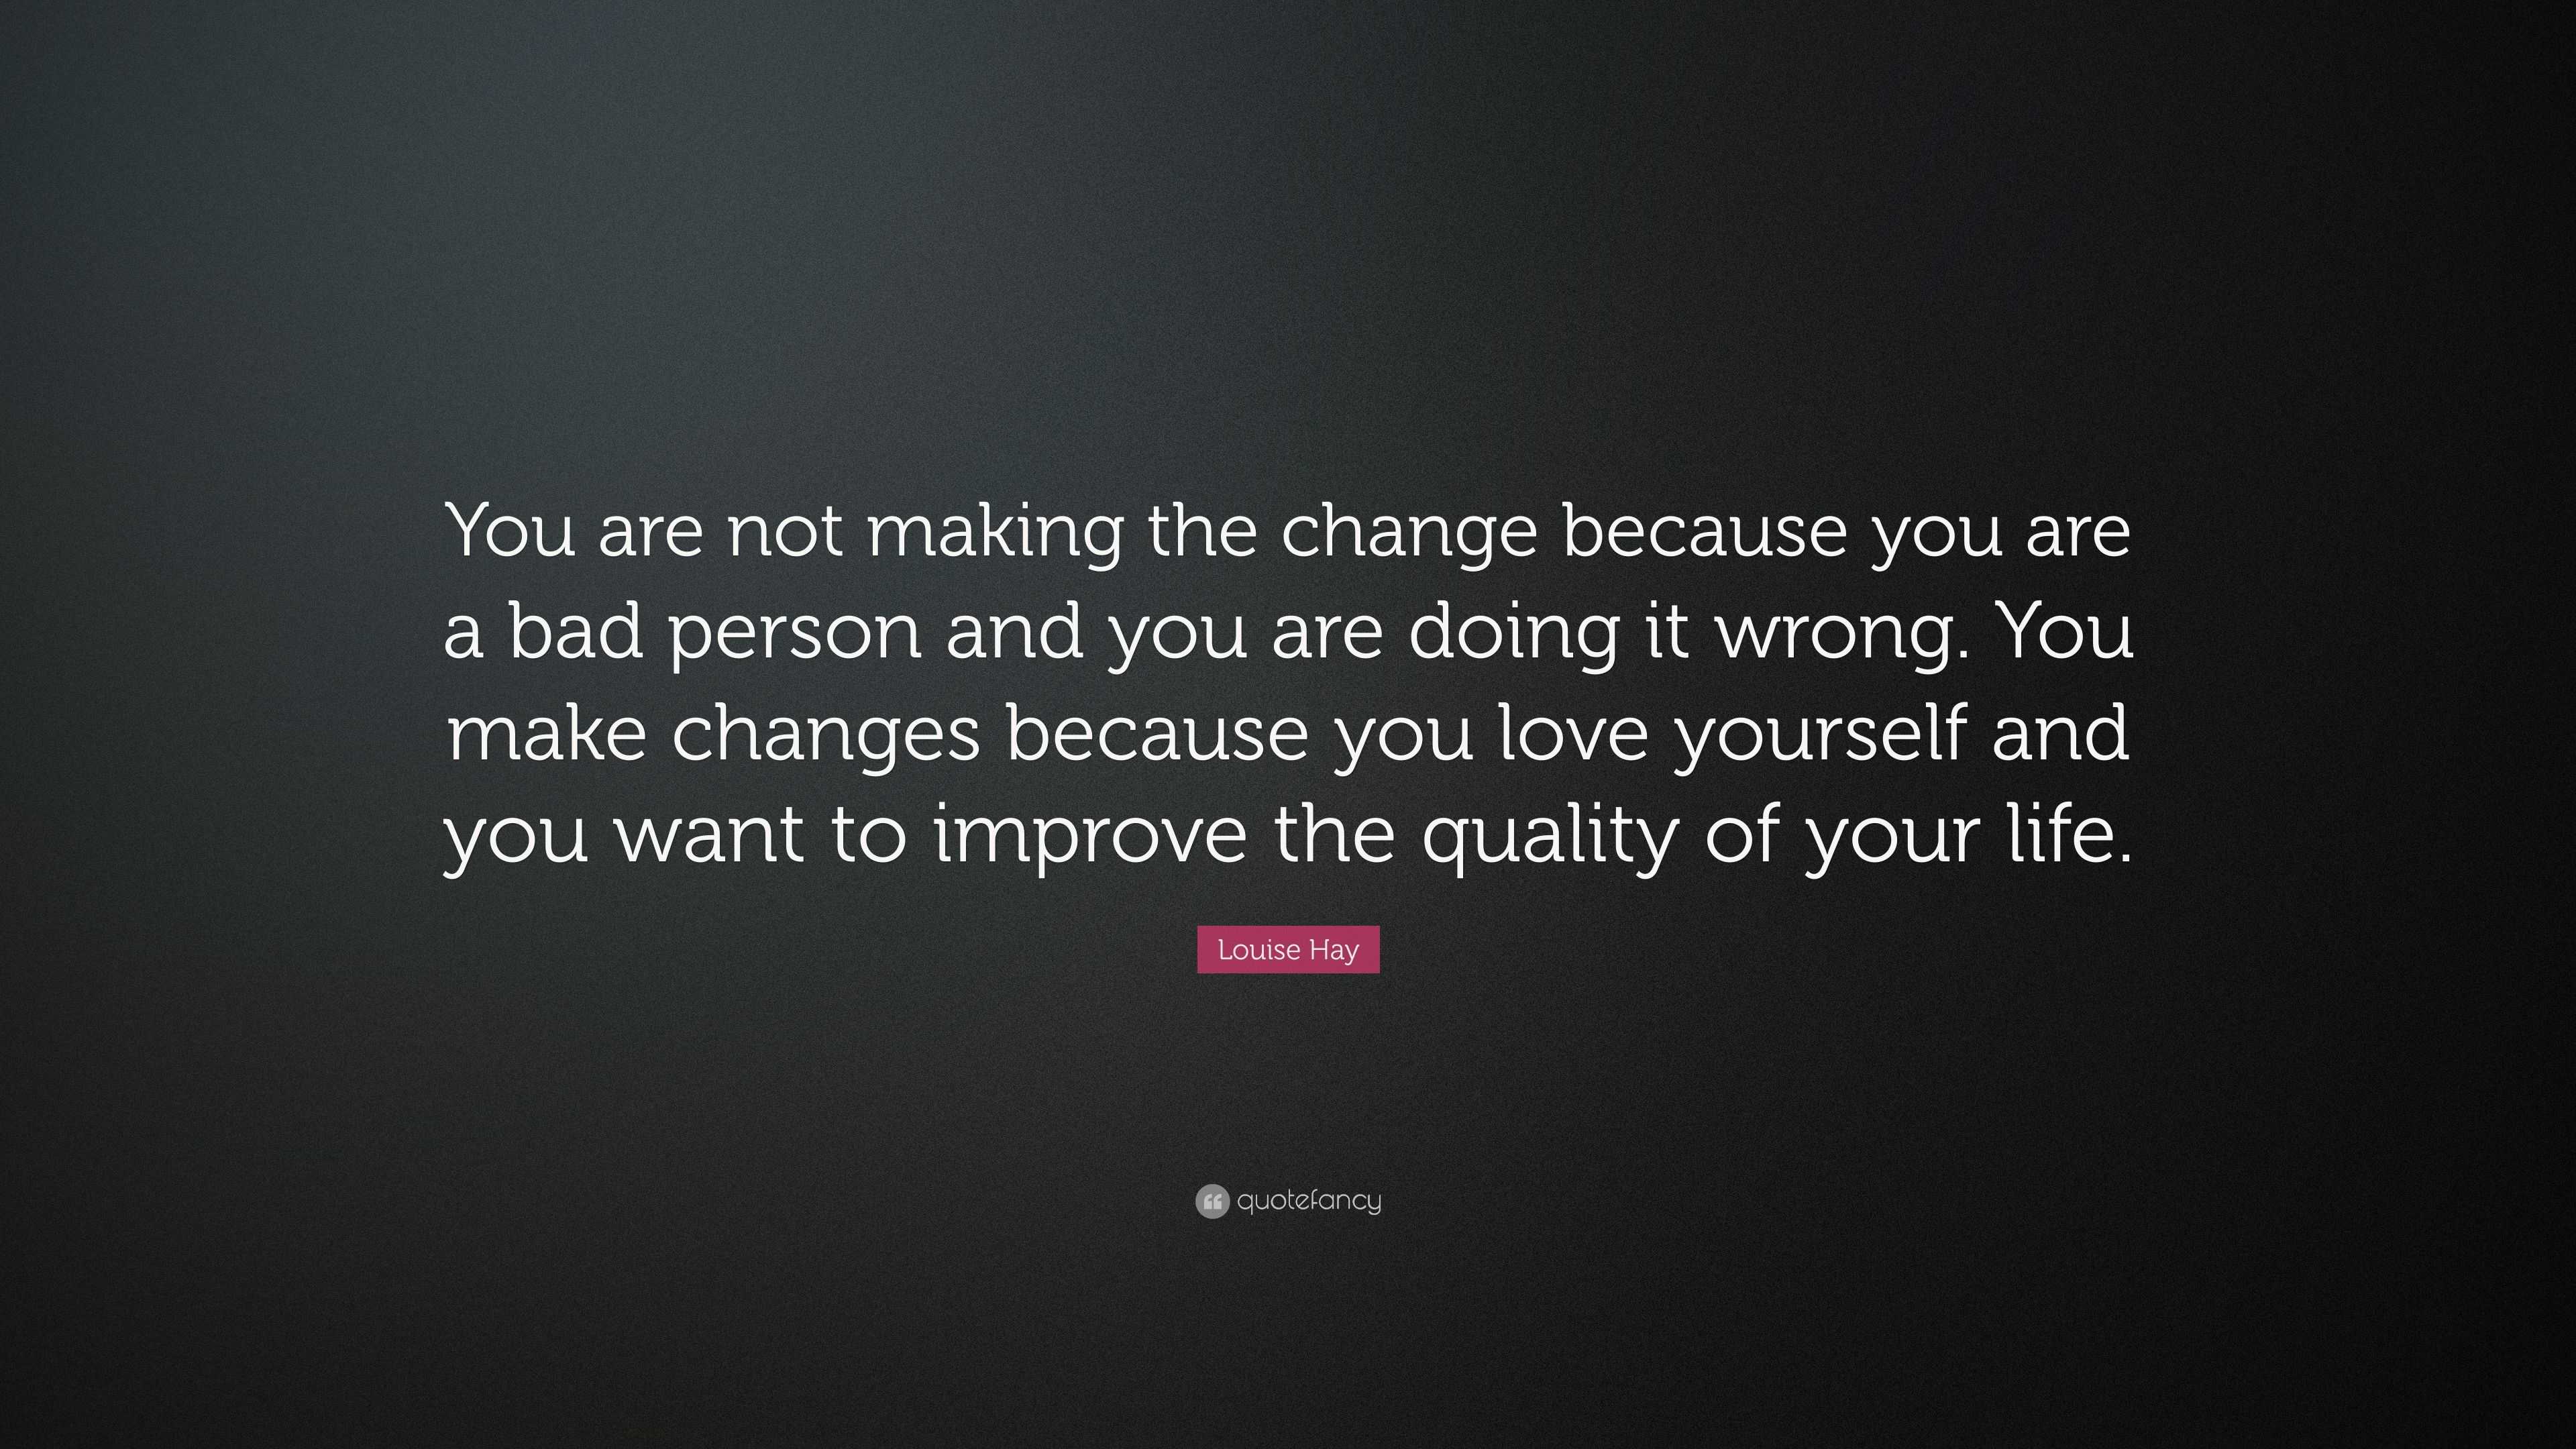 Louise Hay Quote: “You are not making the change because you are a bad ...